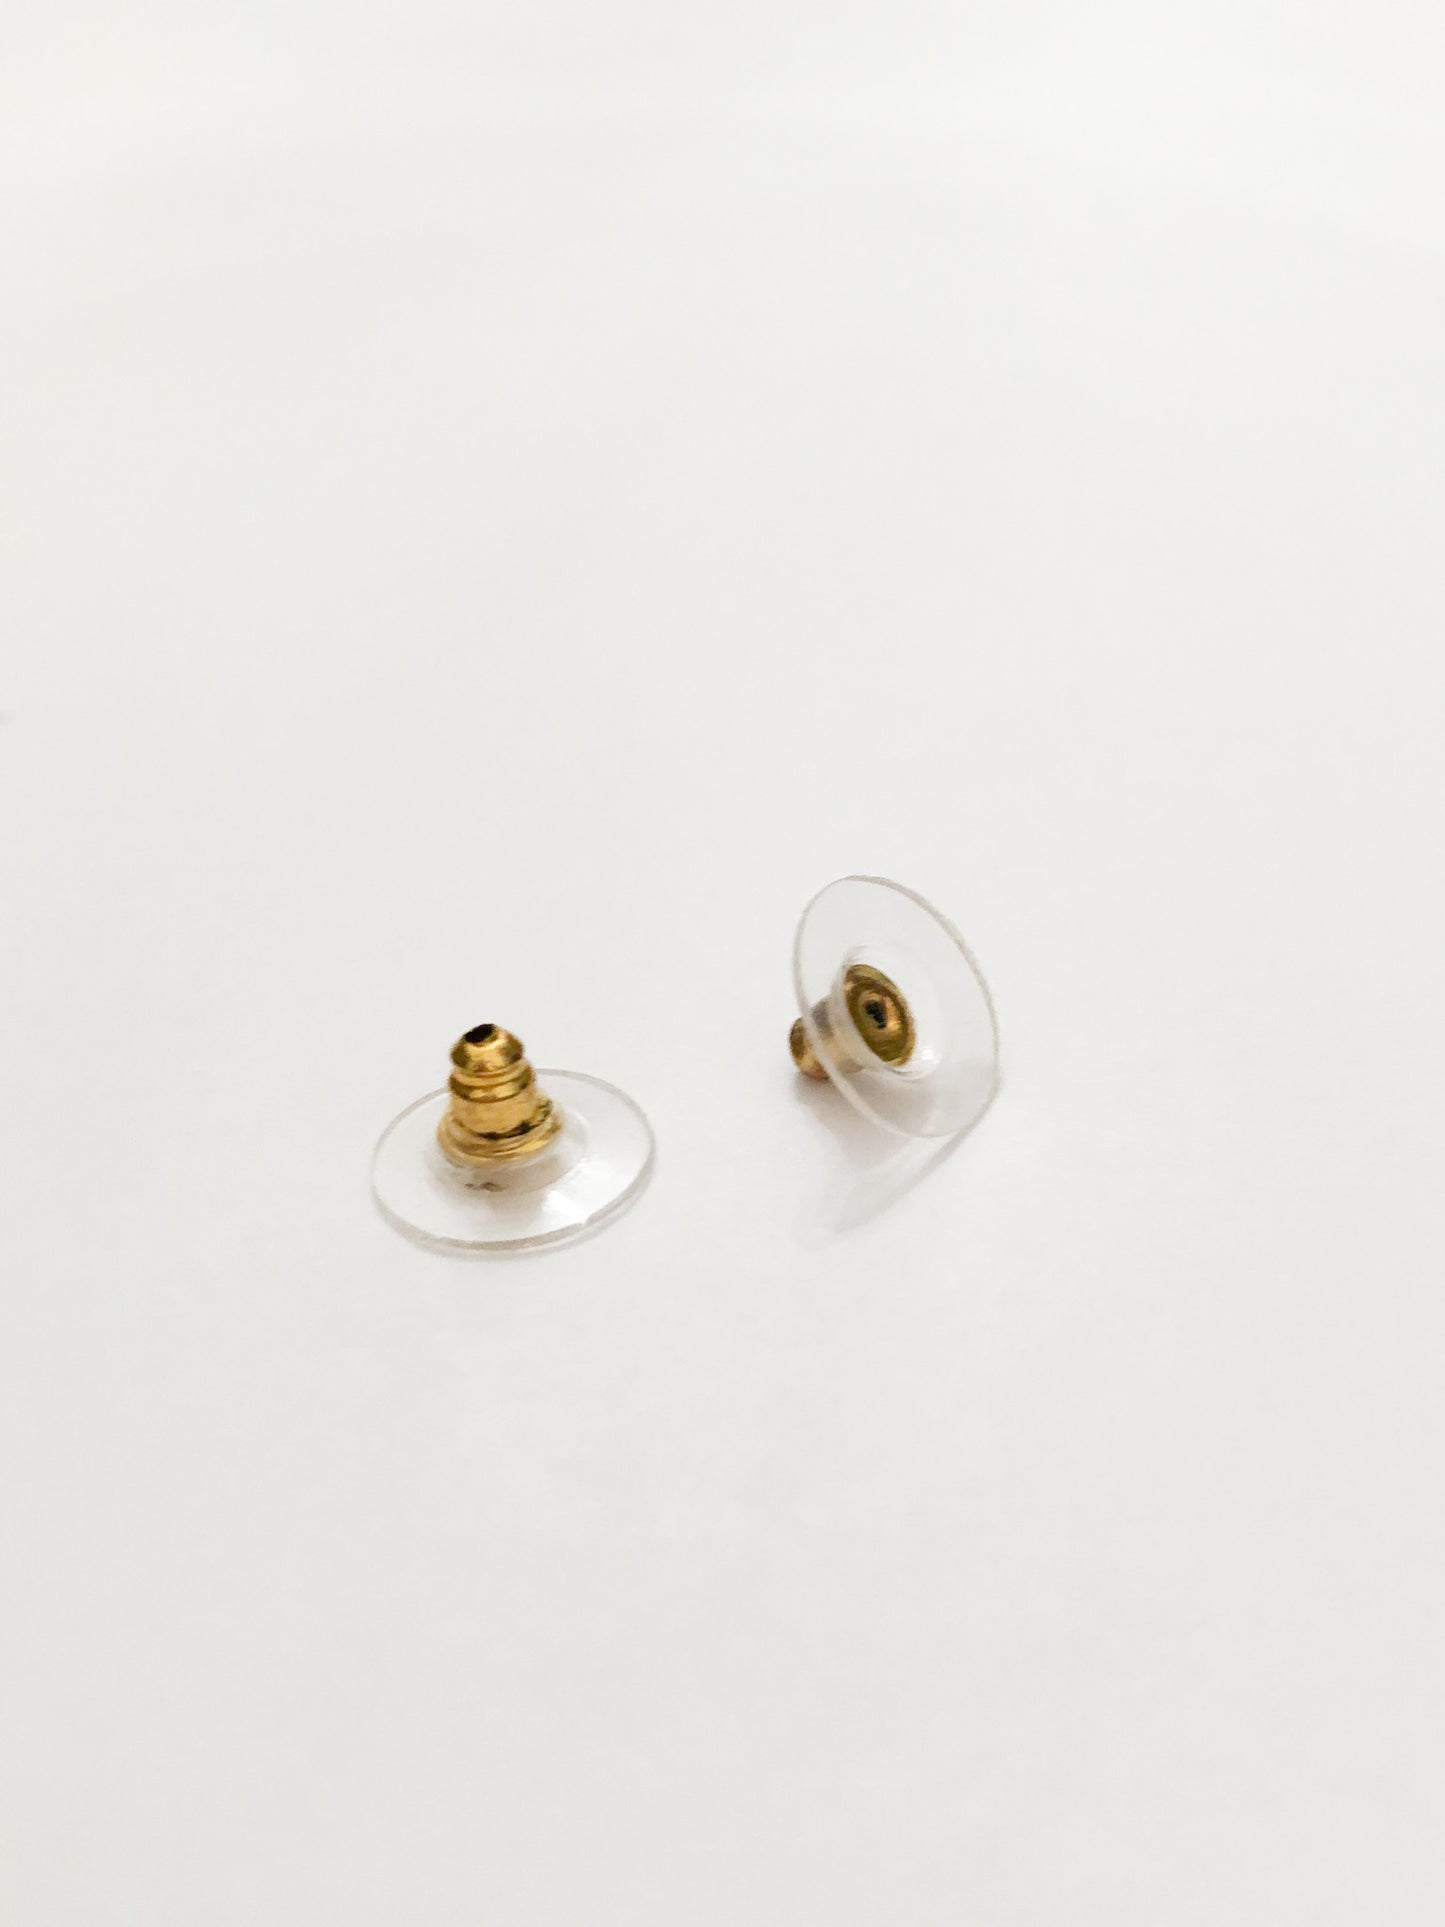 Flat-Pad Spare Earring Backs - Silver and Gold-Toned